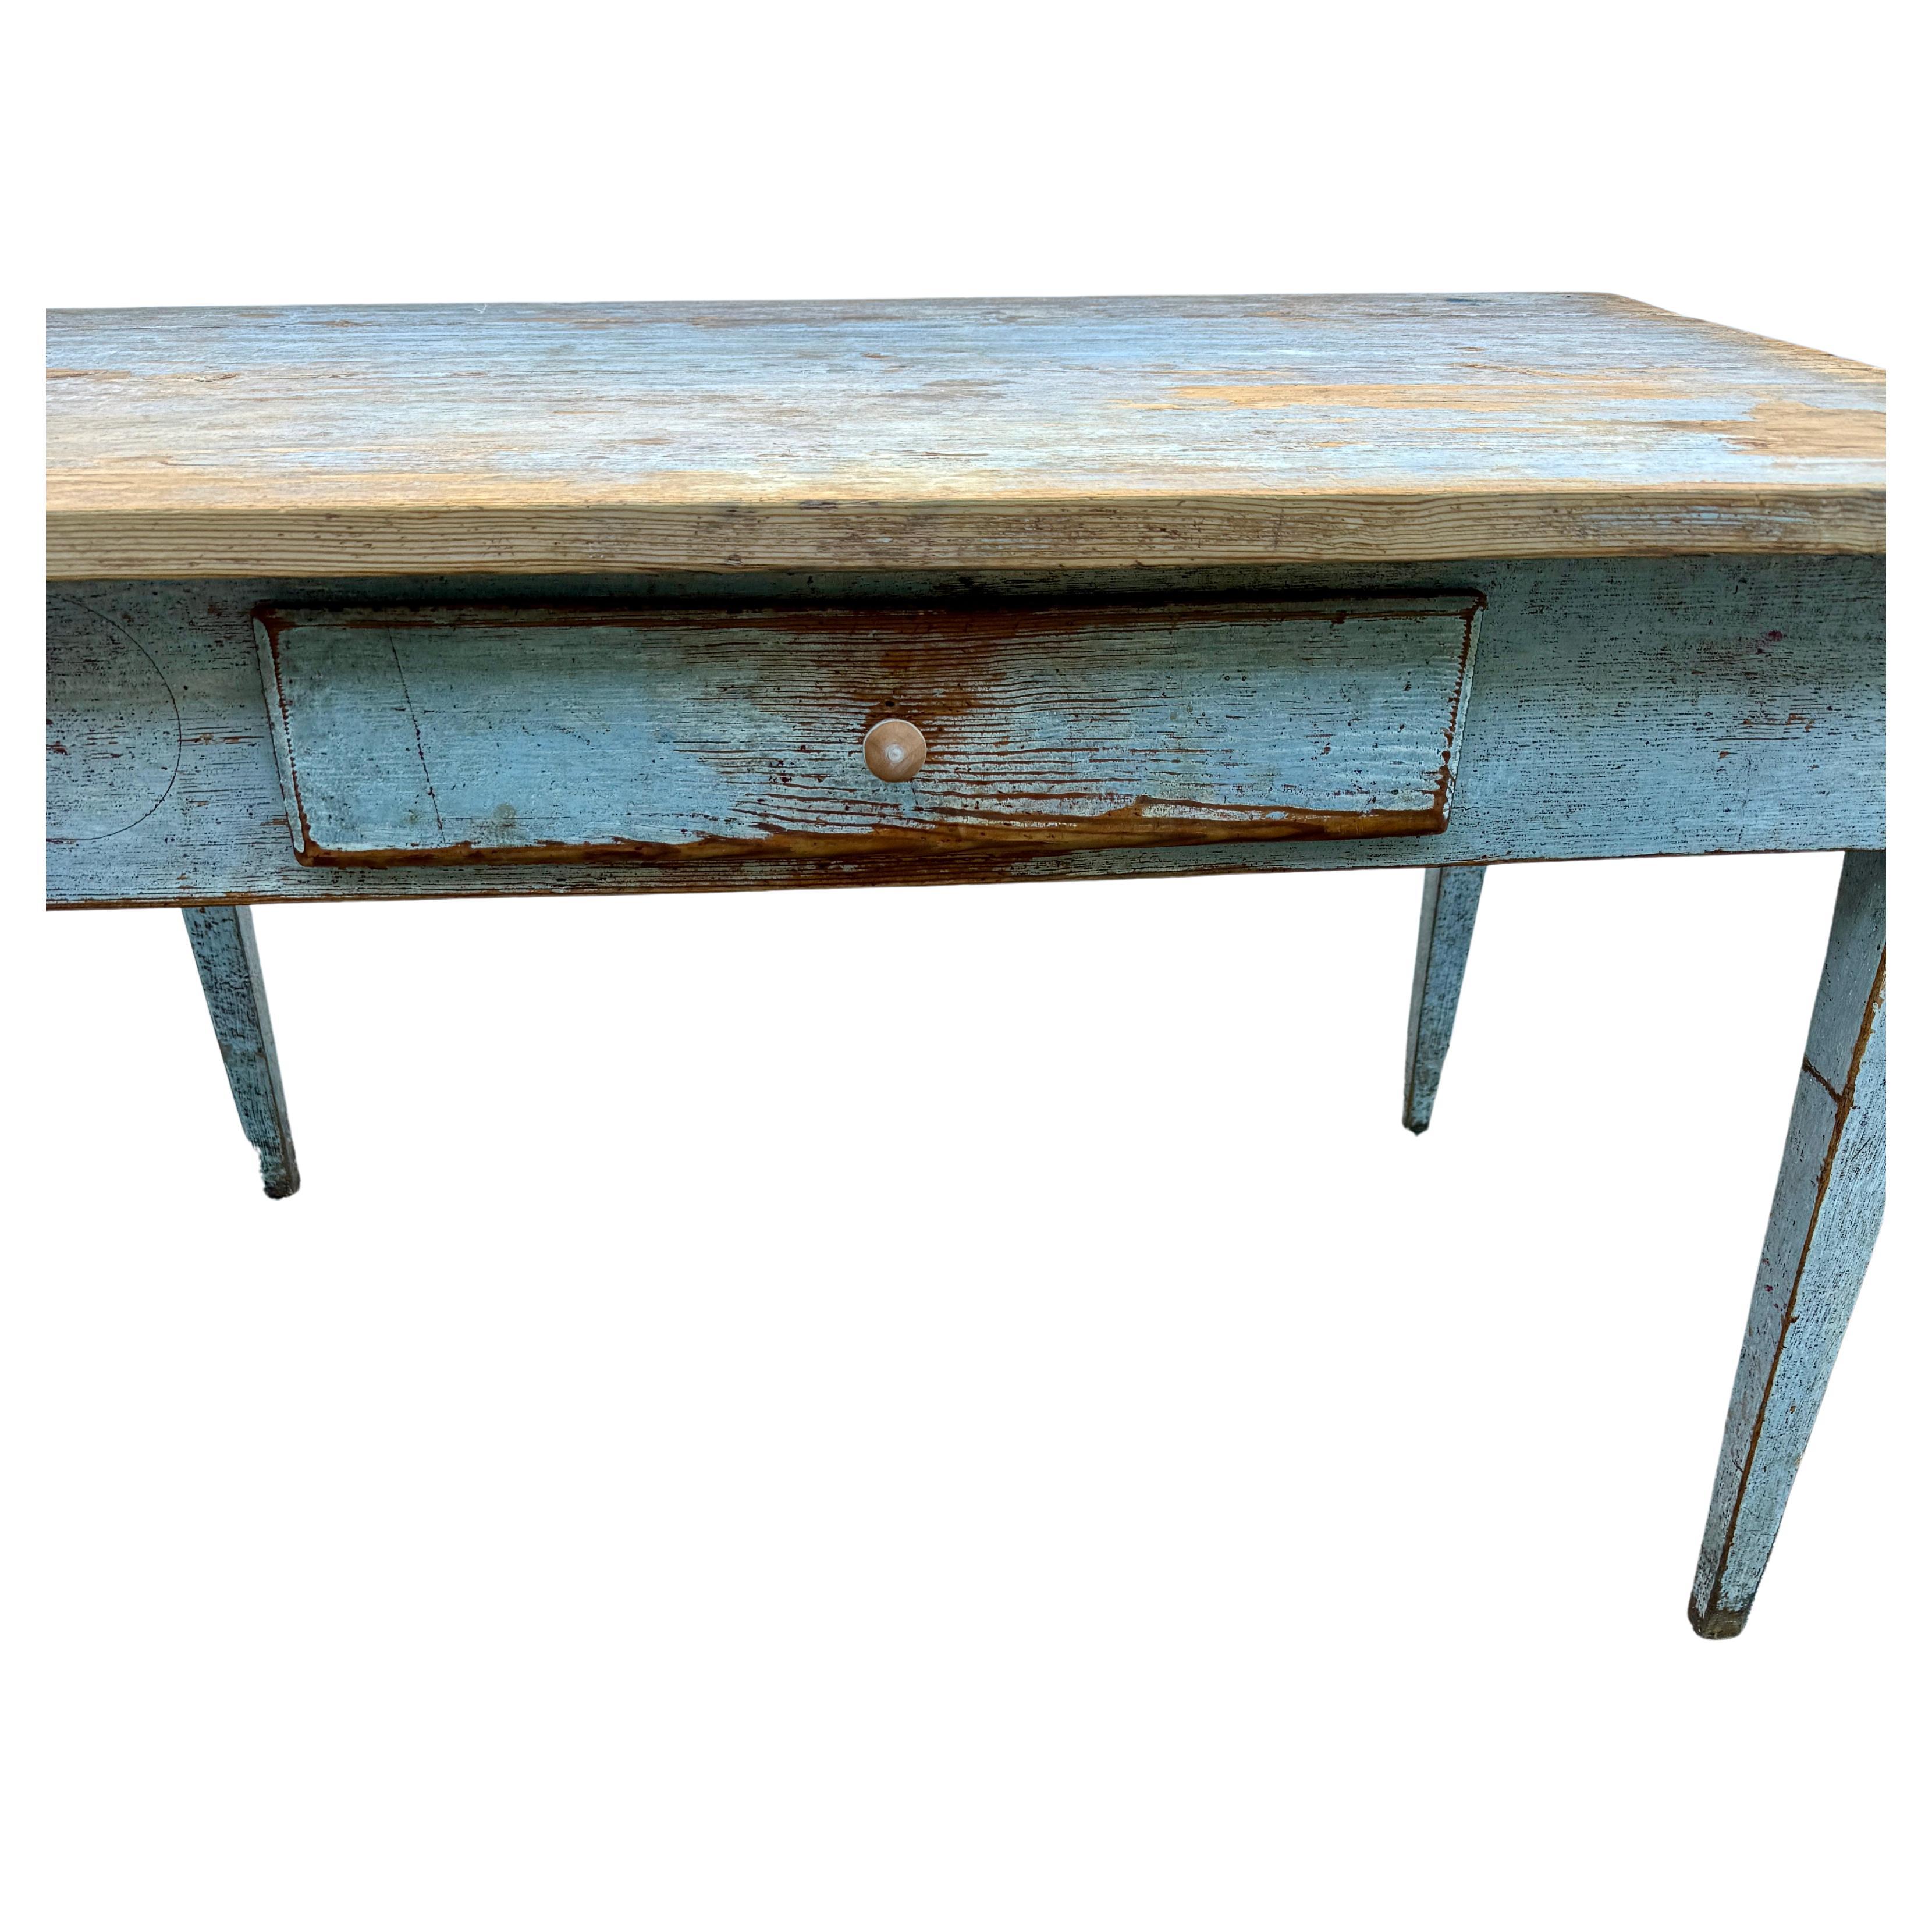 Hand-Crafted Period Swedish Gustavian Painted Office Desk Table With Drawer, 1790-1810